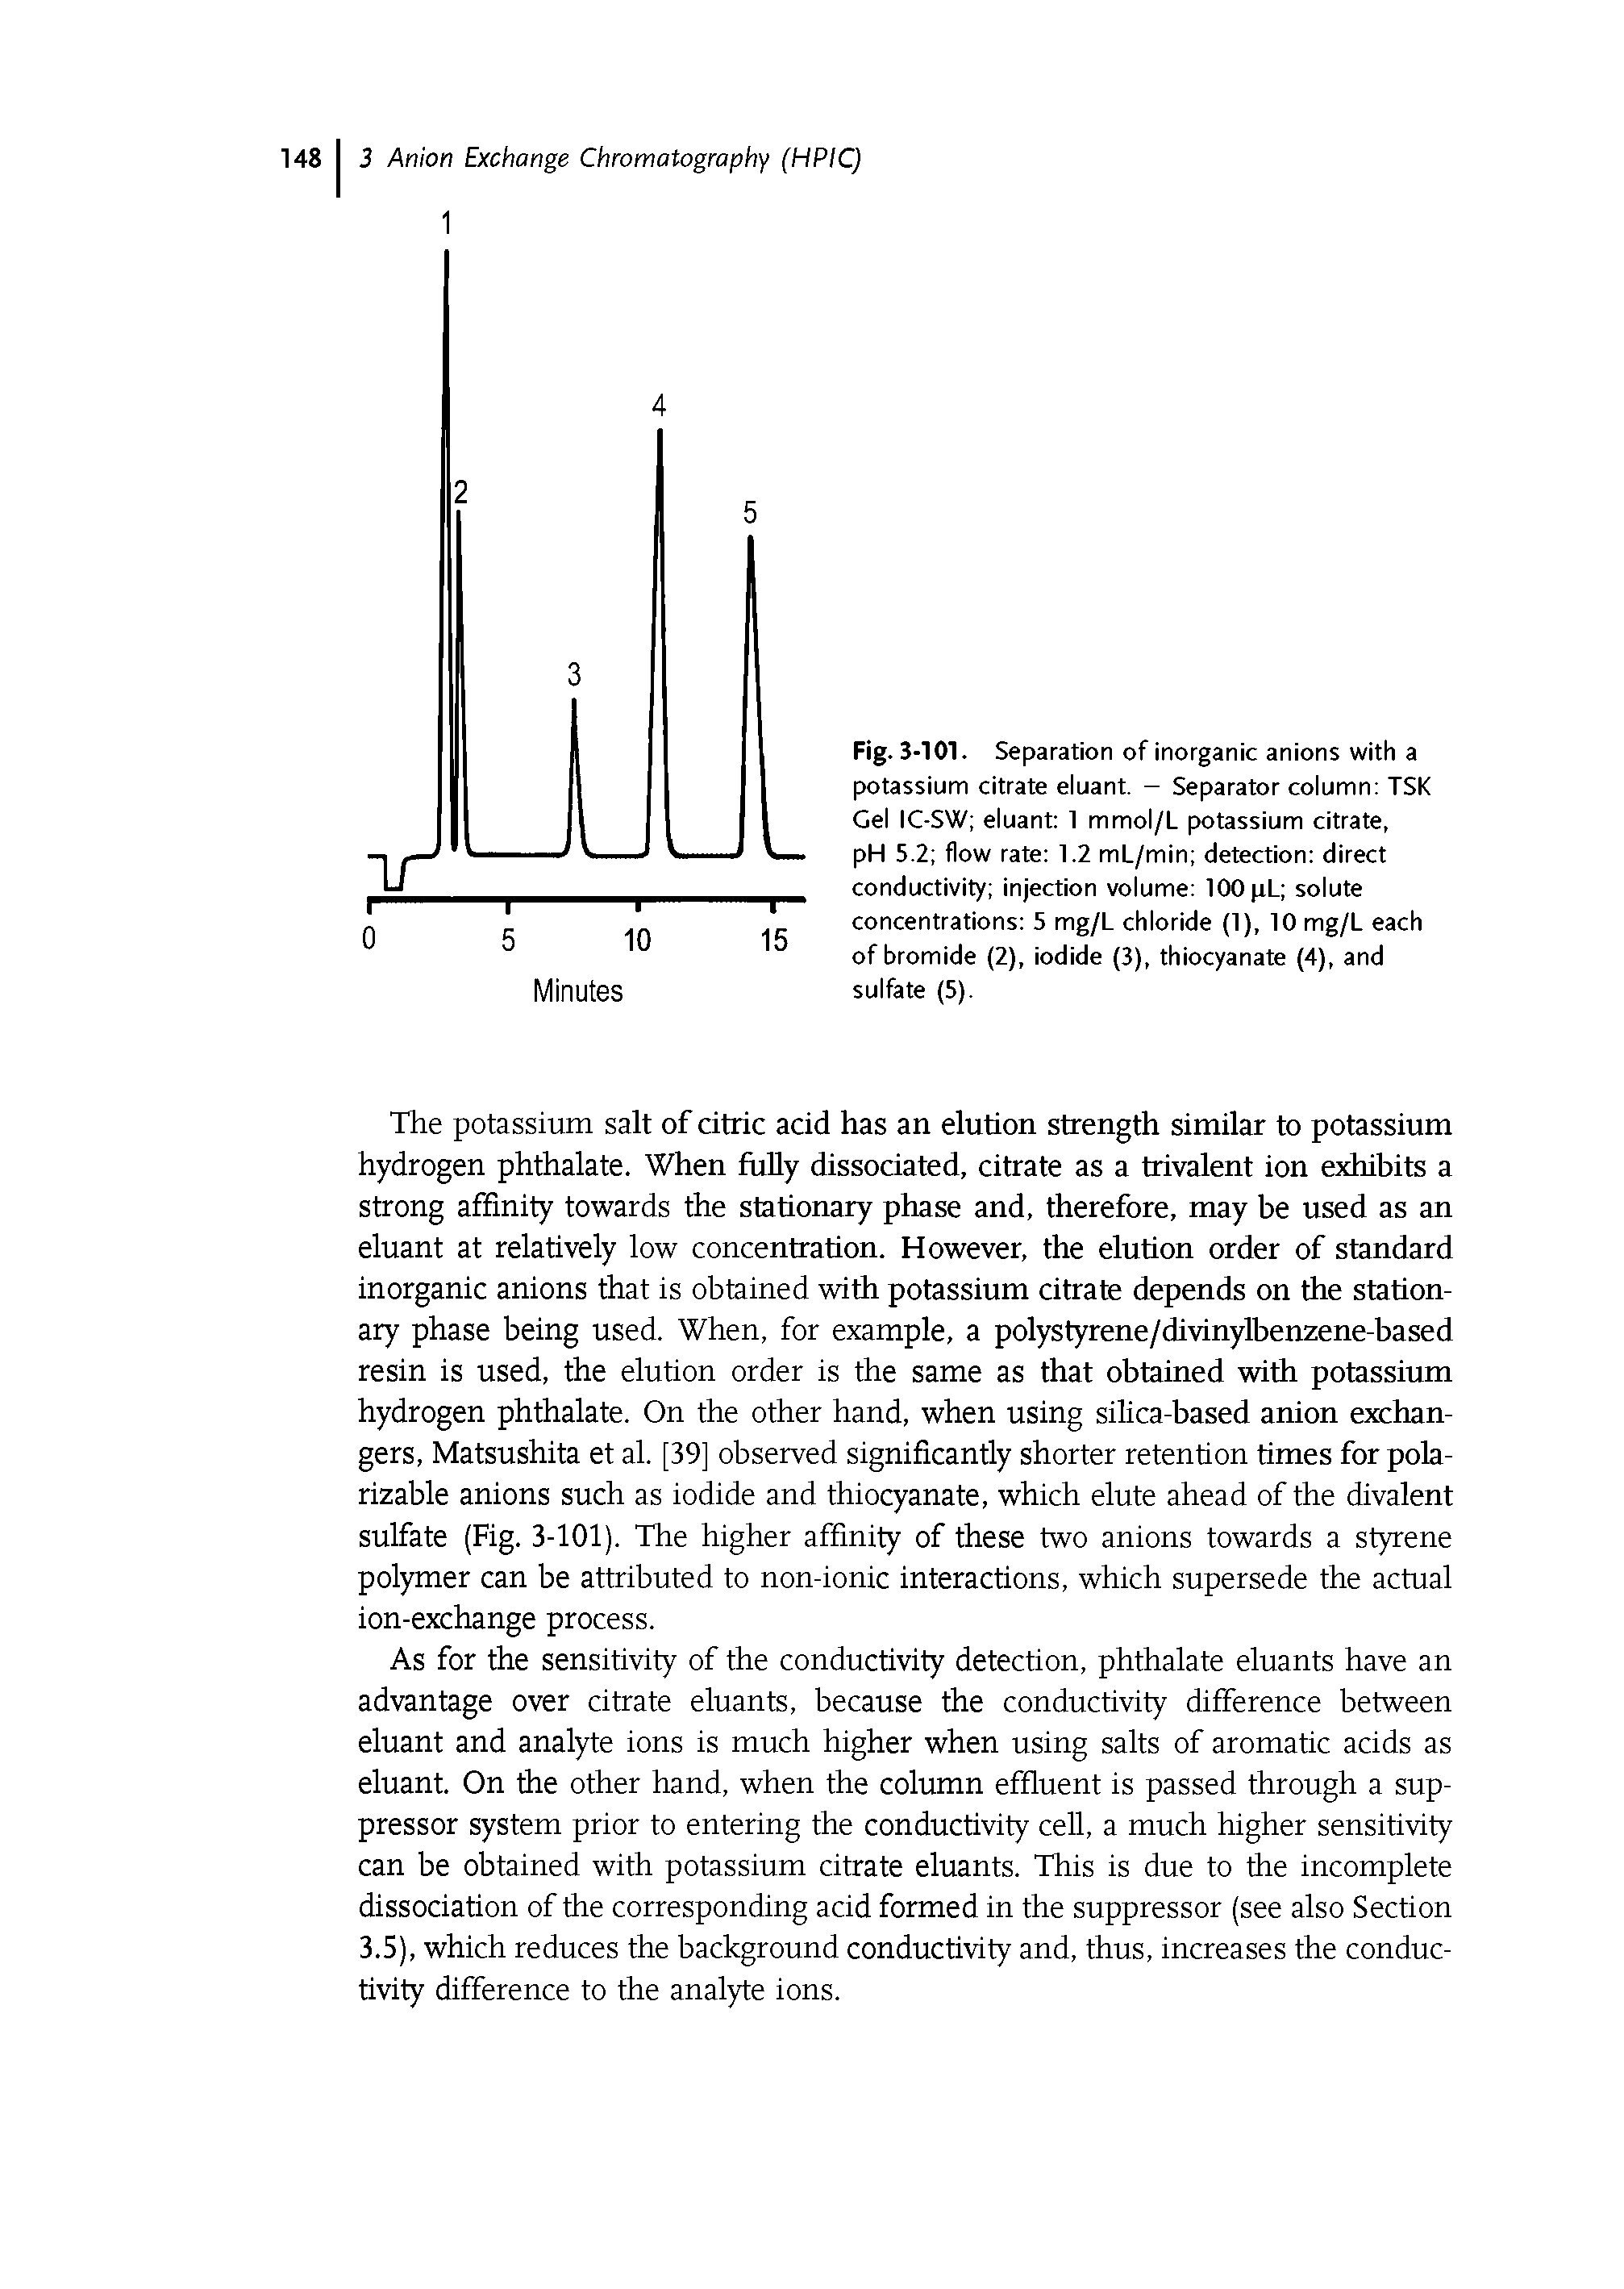 Fig. 3-101. Separation of inorganic anions with a potassium citrate eluant. - Separator column TSK Gel IC-SW eluant 1 mmol/L potassium citrate, pH 5.2 flow rate 1.2 mL/min detection direct conductivity injection volume 100 pL solute concentrations 5 mg/L chloride (1), 10 mg/L each of bromide (2). iodide (3), thiocyanate (4), and sulfate (5).